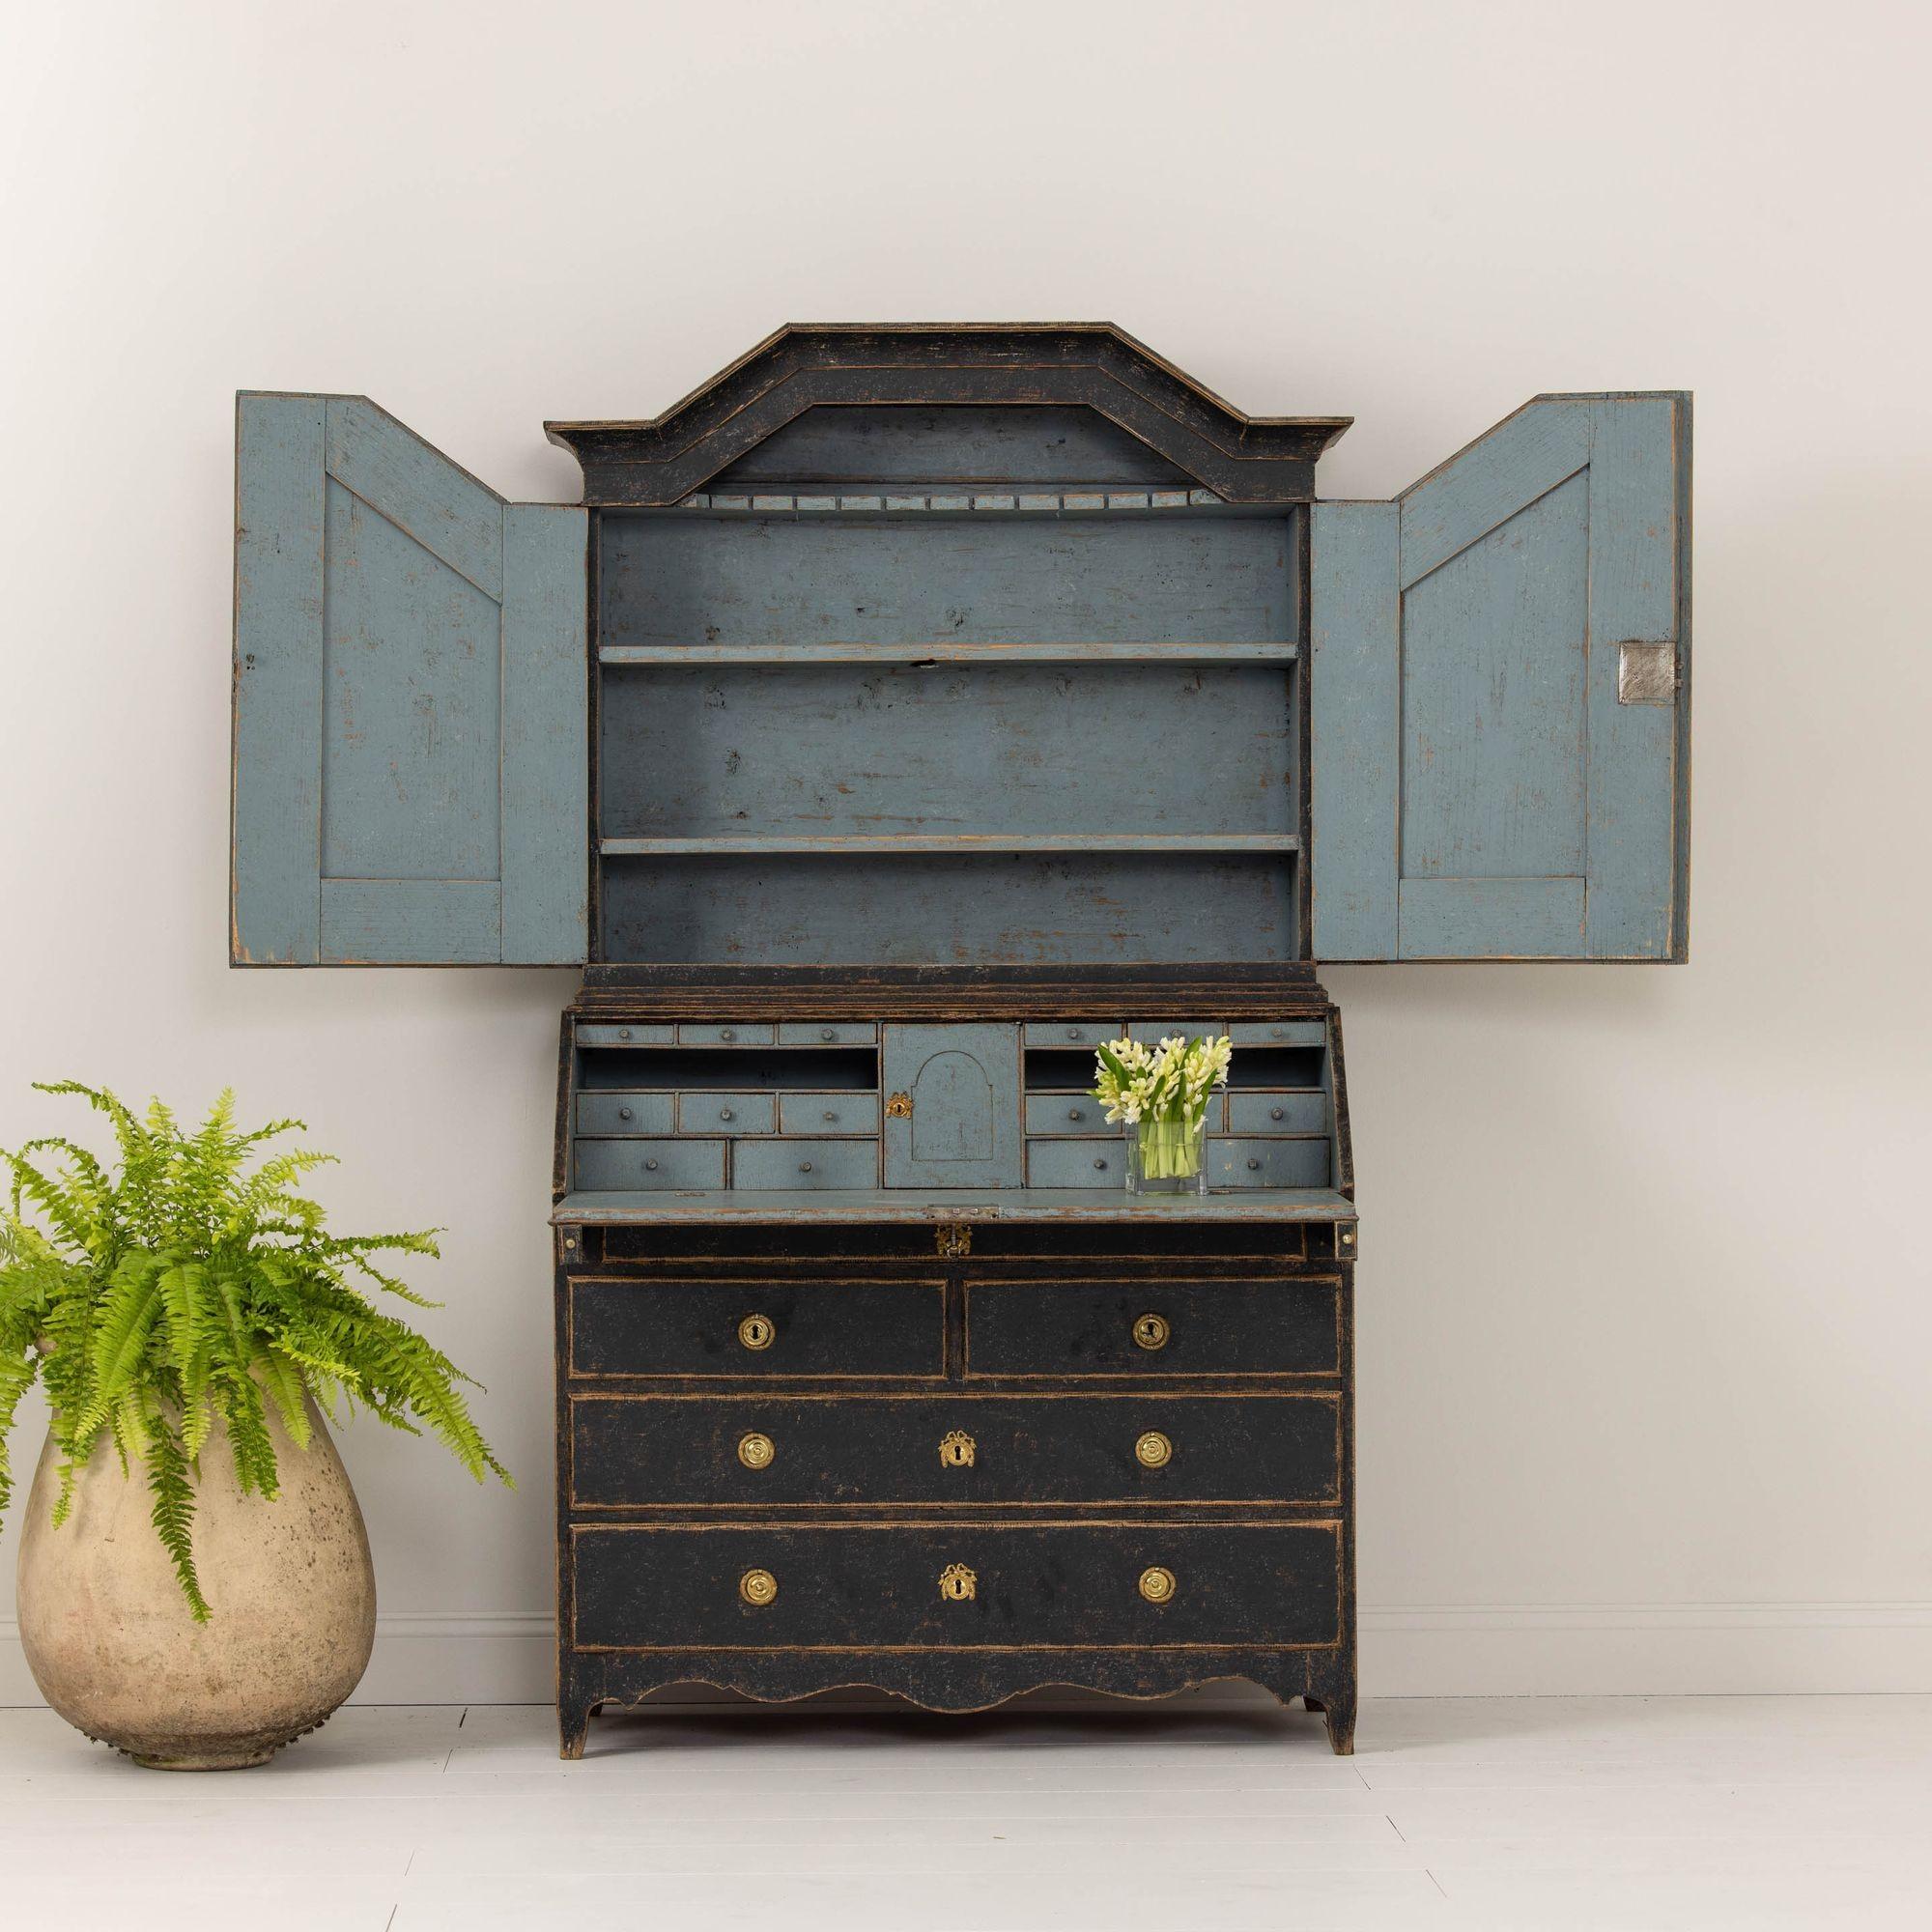 Gustavian 18th c. Swedish Painted Secretary with Library For Sale